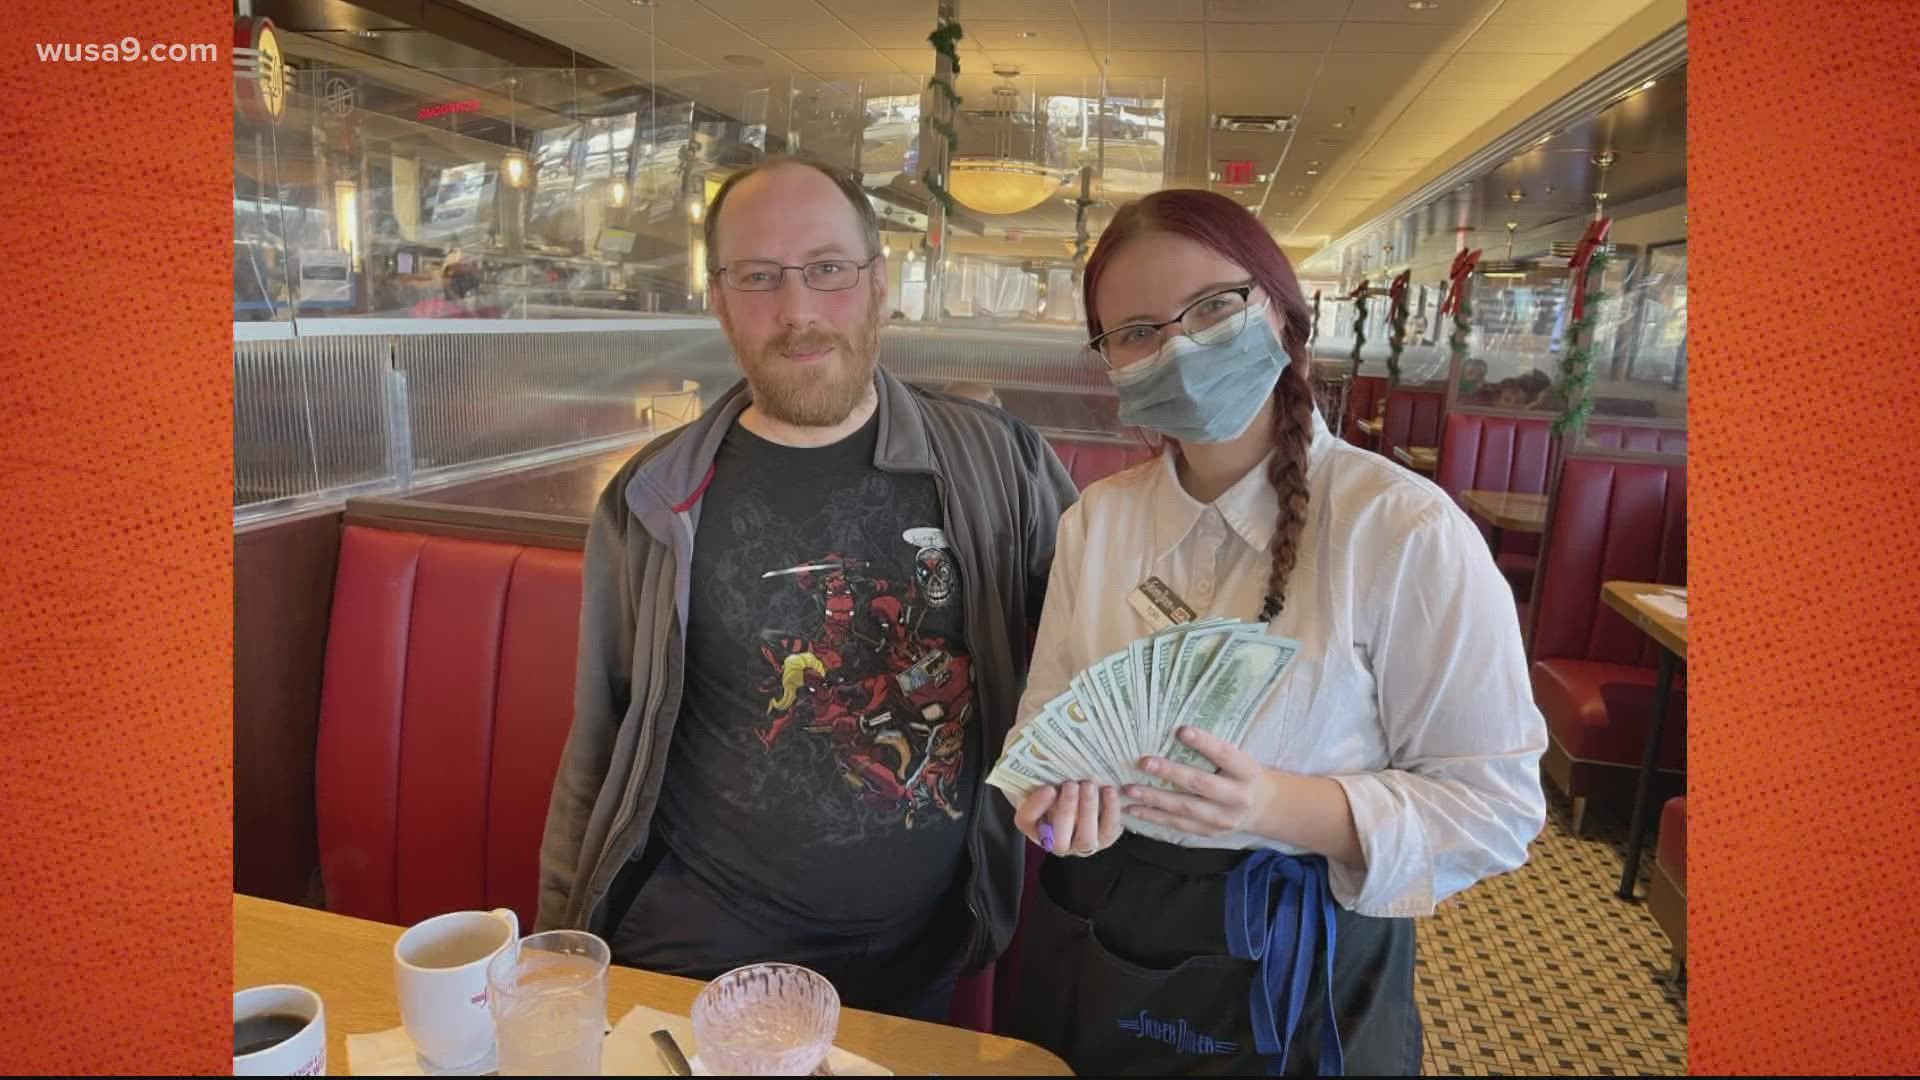 The tip came from one of her regulars whose name is David. Co-workers say in just 5 months at the diner this waitress has built loyal customers.